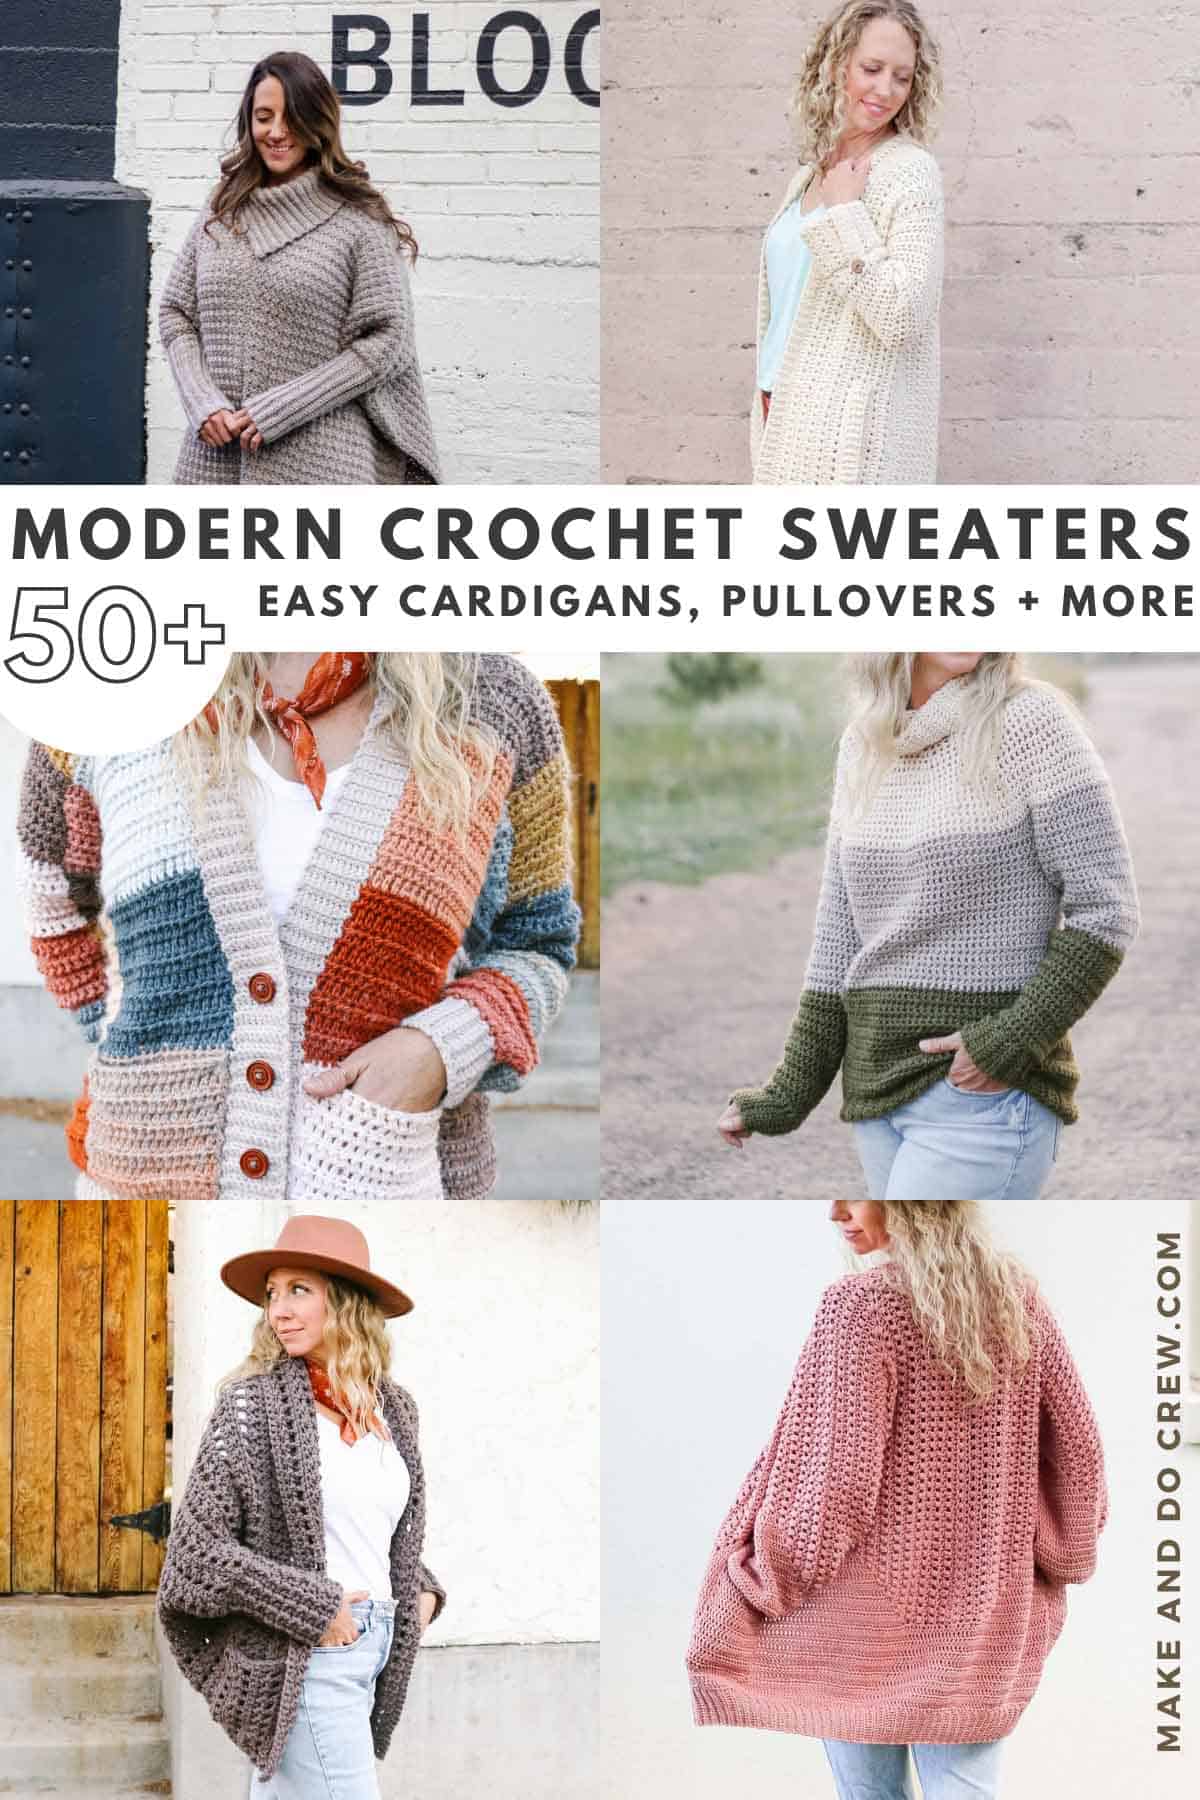 Are Crochet Sweaters In Style?